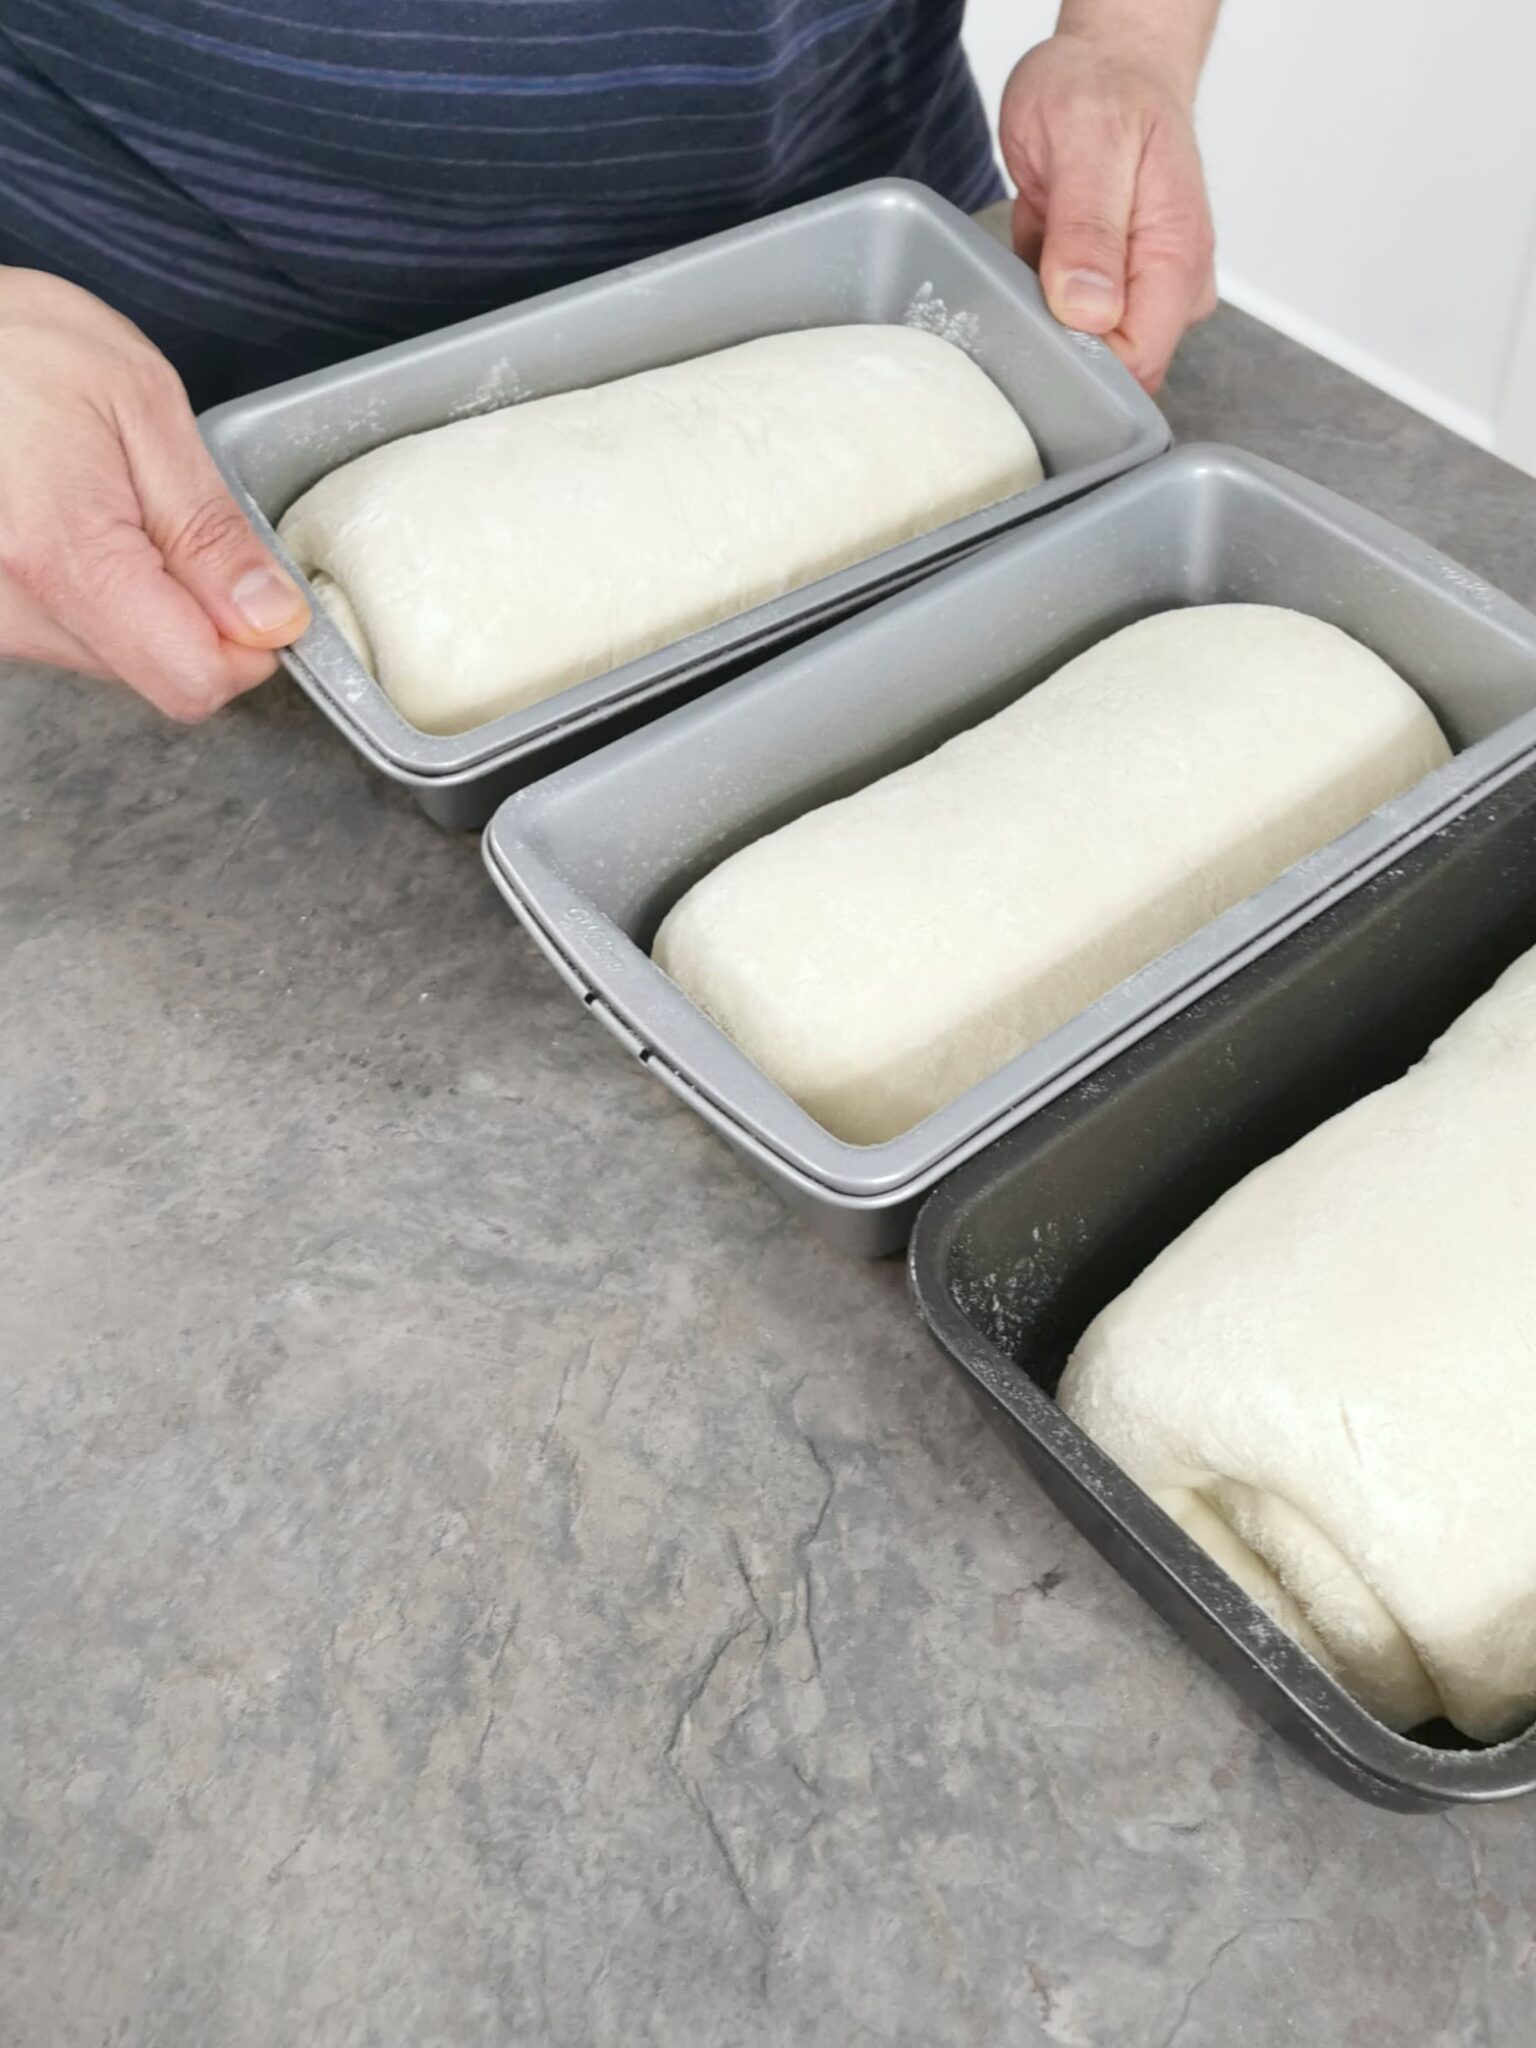 Unbaked loaves placed into pans.